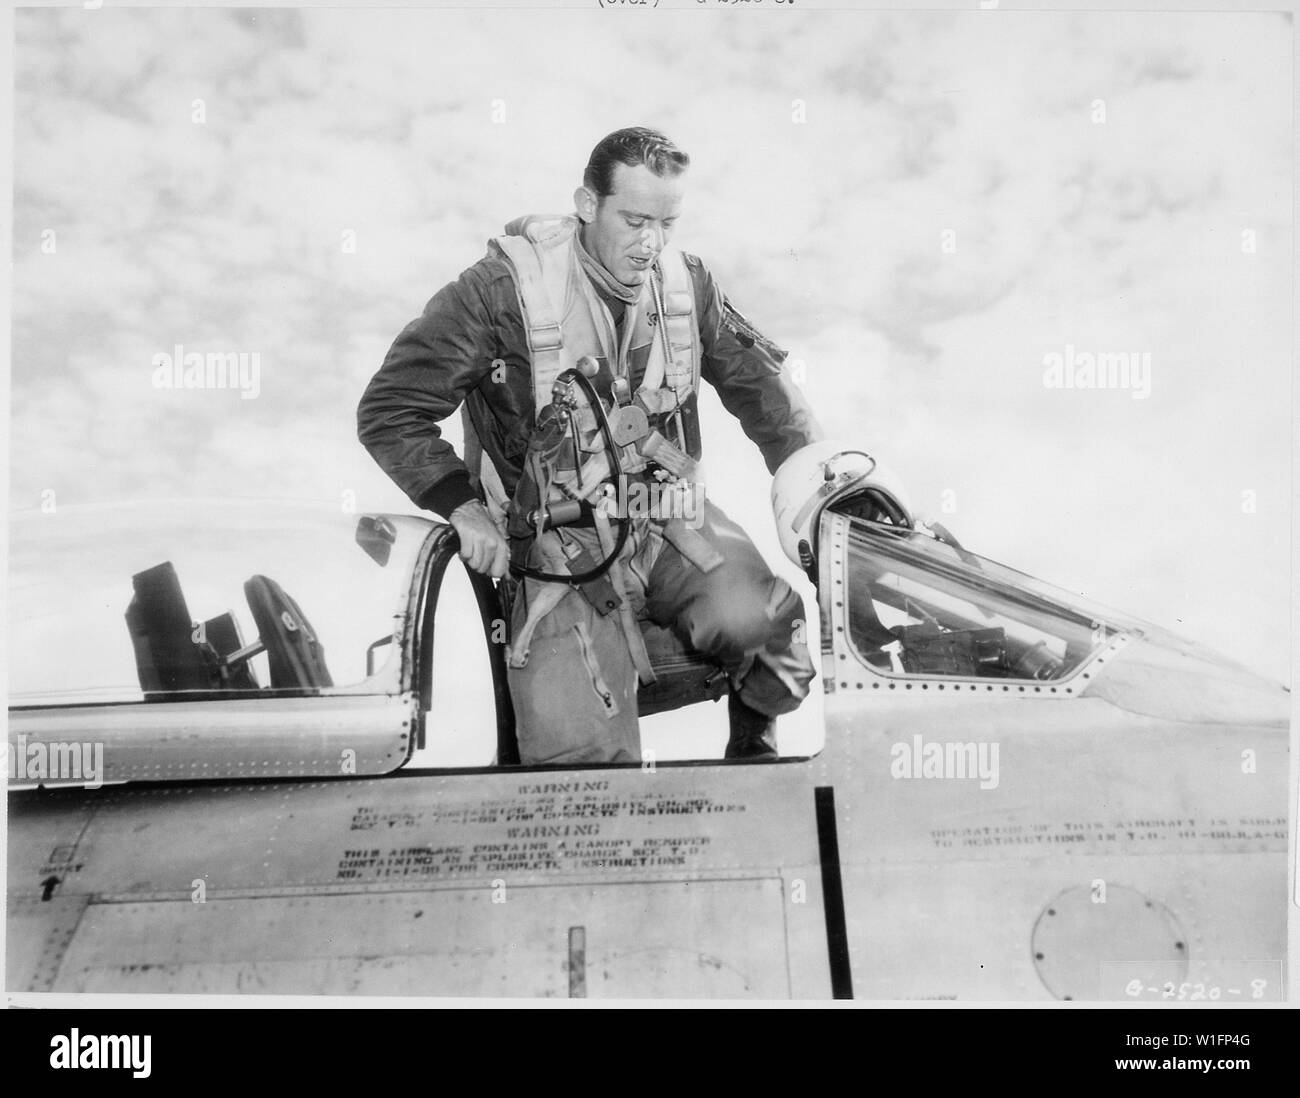 KOREA--U.S. Air Force F-86 Sabre jet pilot, Capt. Kenneth D. Critchfield, Fort Madison, Iowa, mounts to the cockpit of his deadly, swept-wing jet-fighter to make another sweep of MIG Alley, scene of many vicious duels between American Sabre jet pilots and Communist MIG-15s. Stock Photo